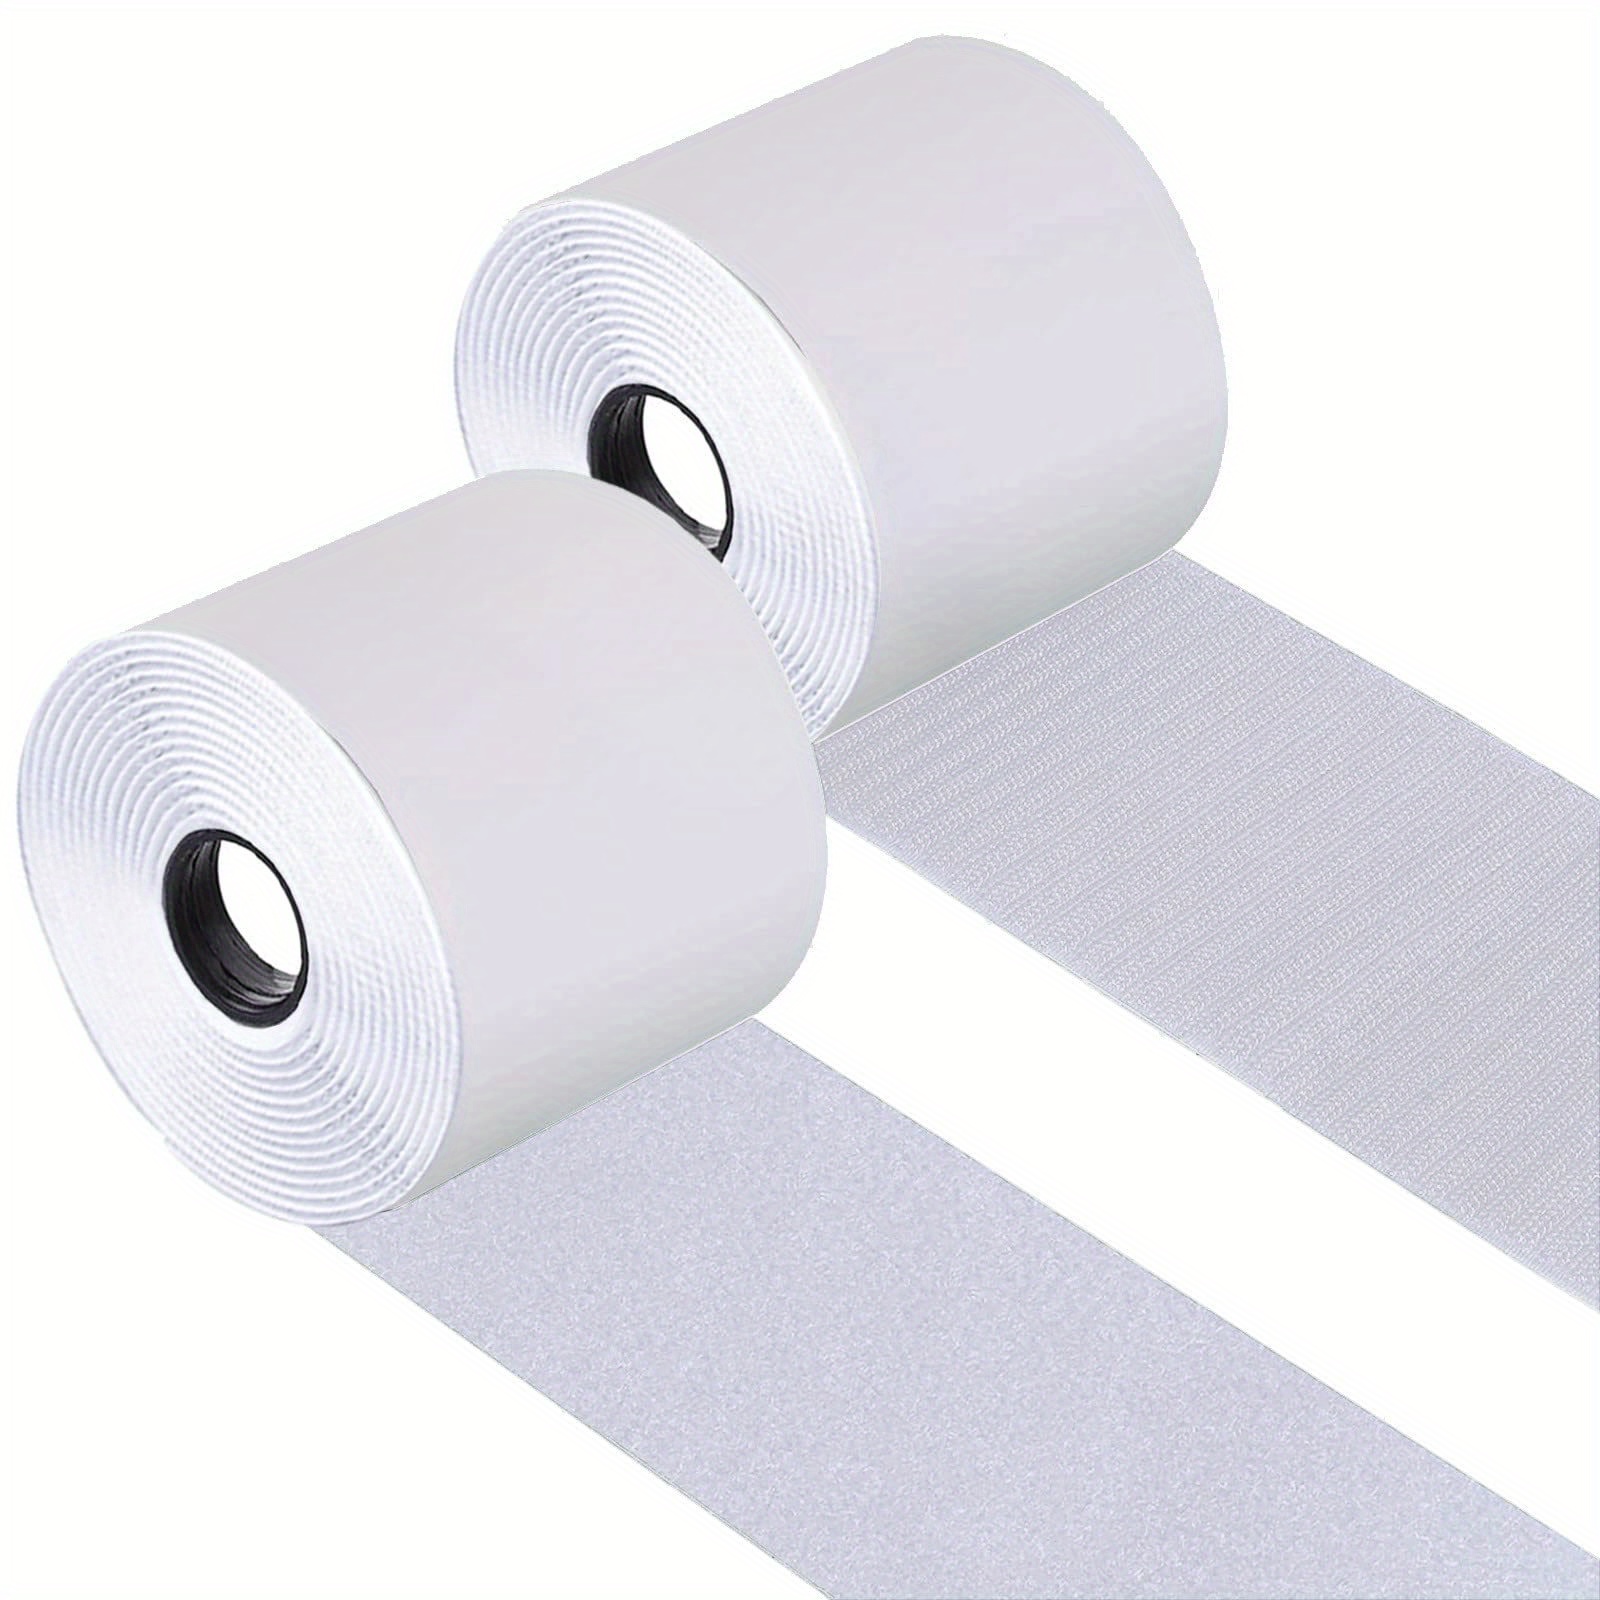 4 Rolls 6 Inch x 10 Feet Hook and Loop Tape Strips with Adhesive